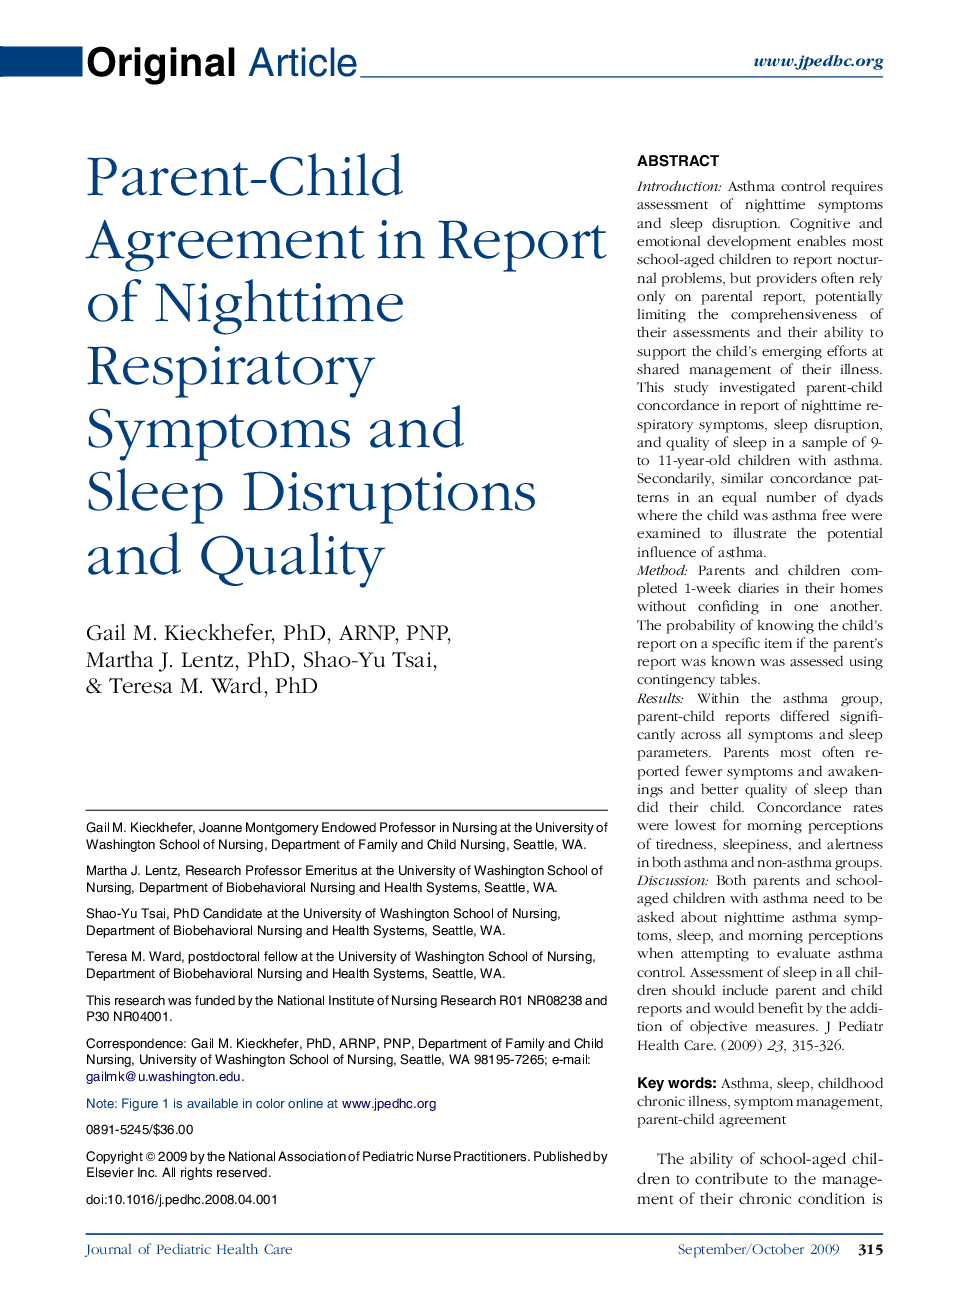 Parent-Child Agreement in Report of Nighttime Respiratory Symptoms and Sleep Disruptions and Quality 